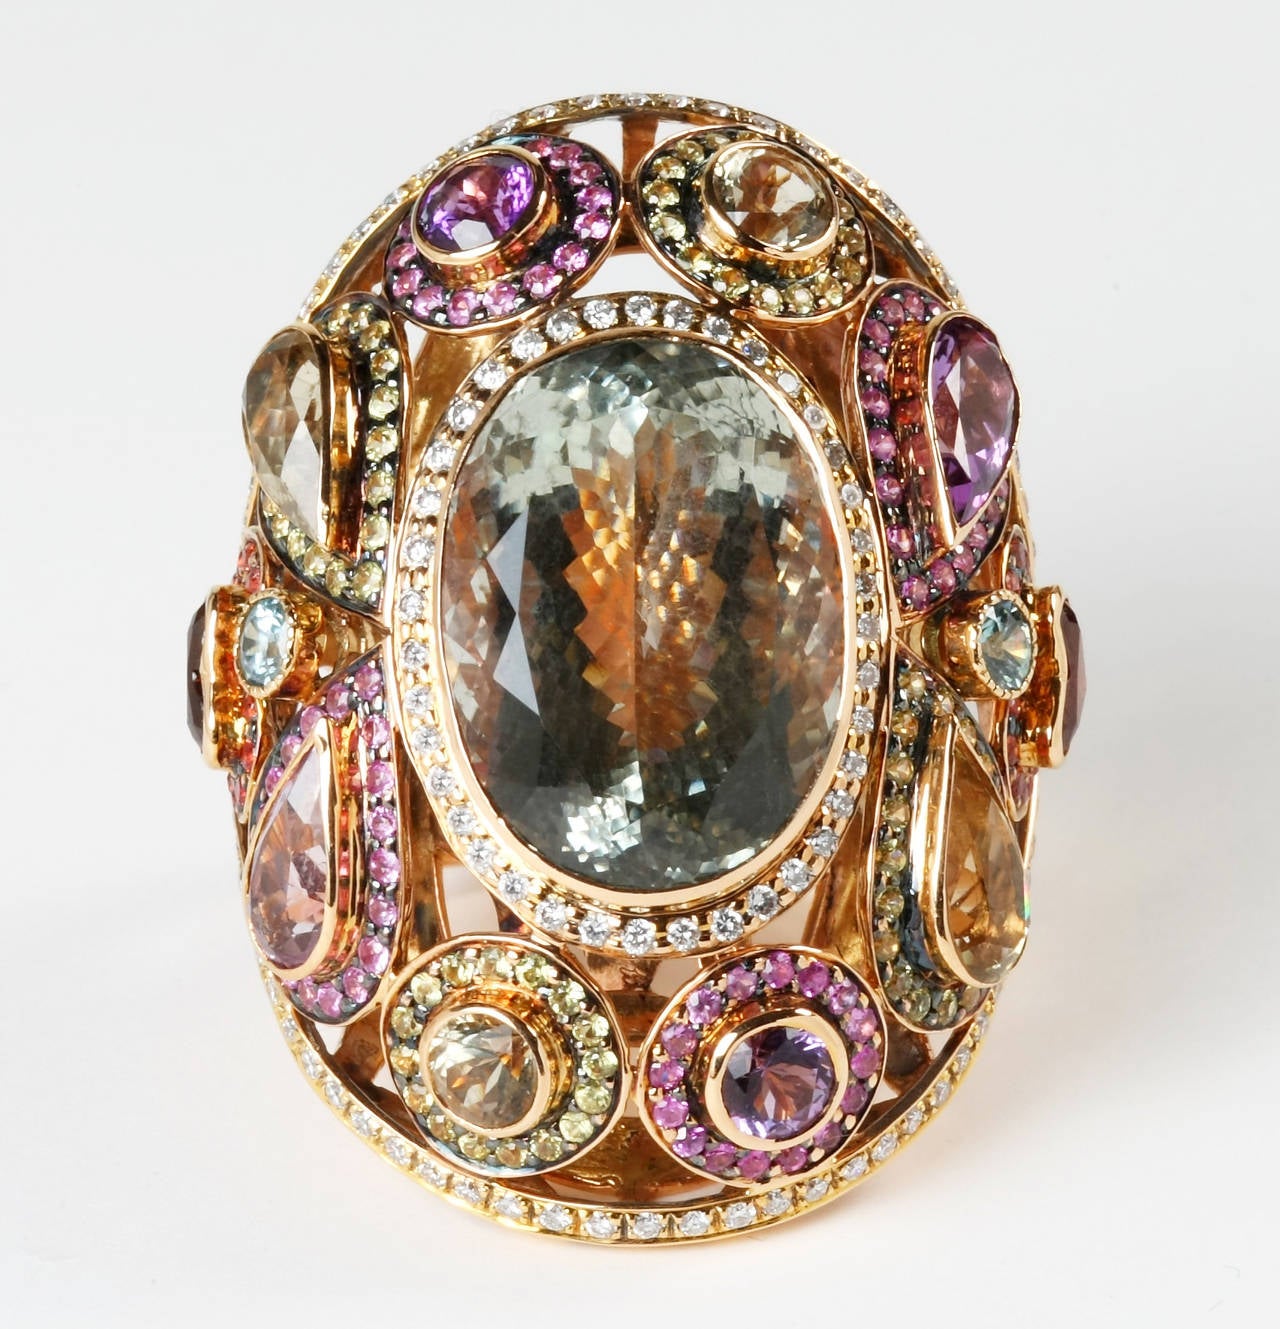 A bold 18K ring set to impress with vivid colors of sapphires, amethyst, peridot garnet and citrine gemstones.  Also surrounded with diamonds to complete the stylish piece. Ring fits a 7.25 finger size but can also be sized from 6.5 -